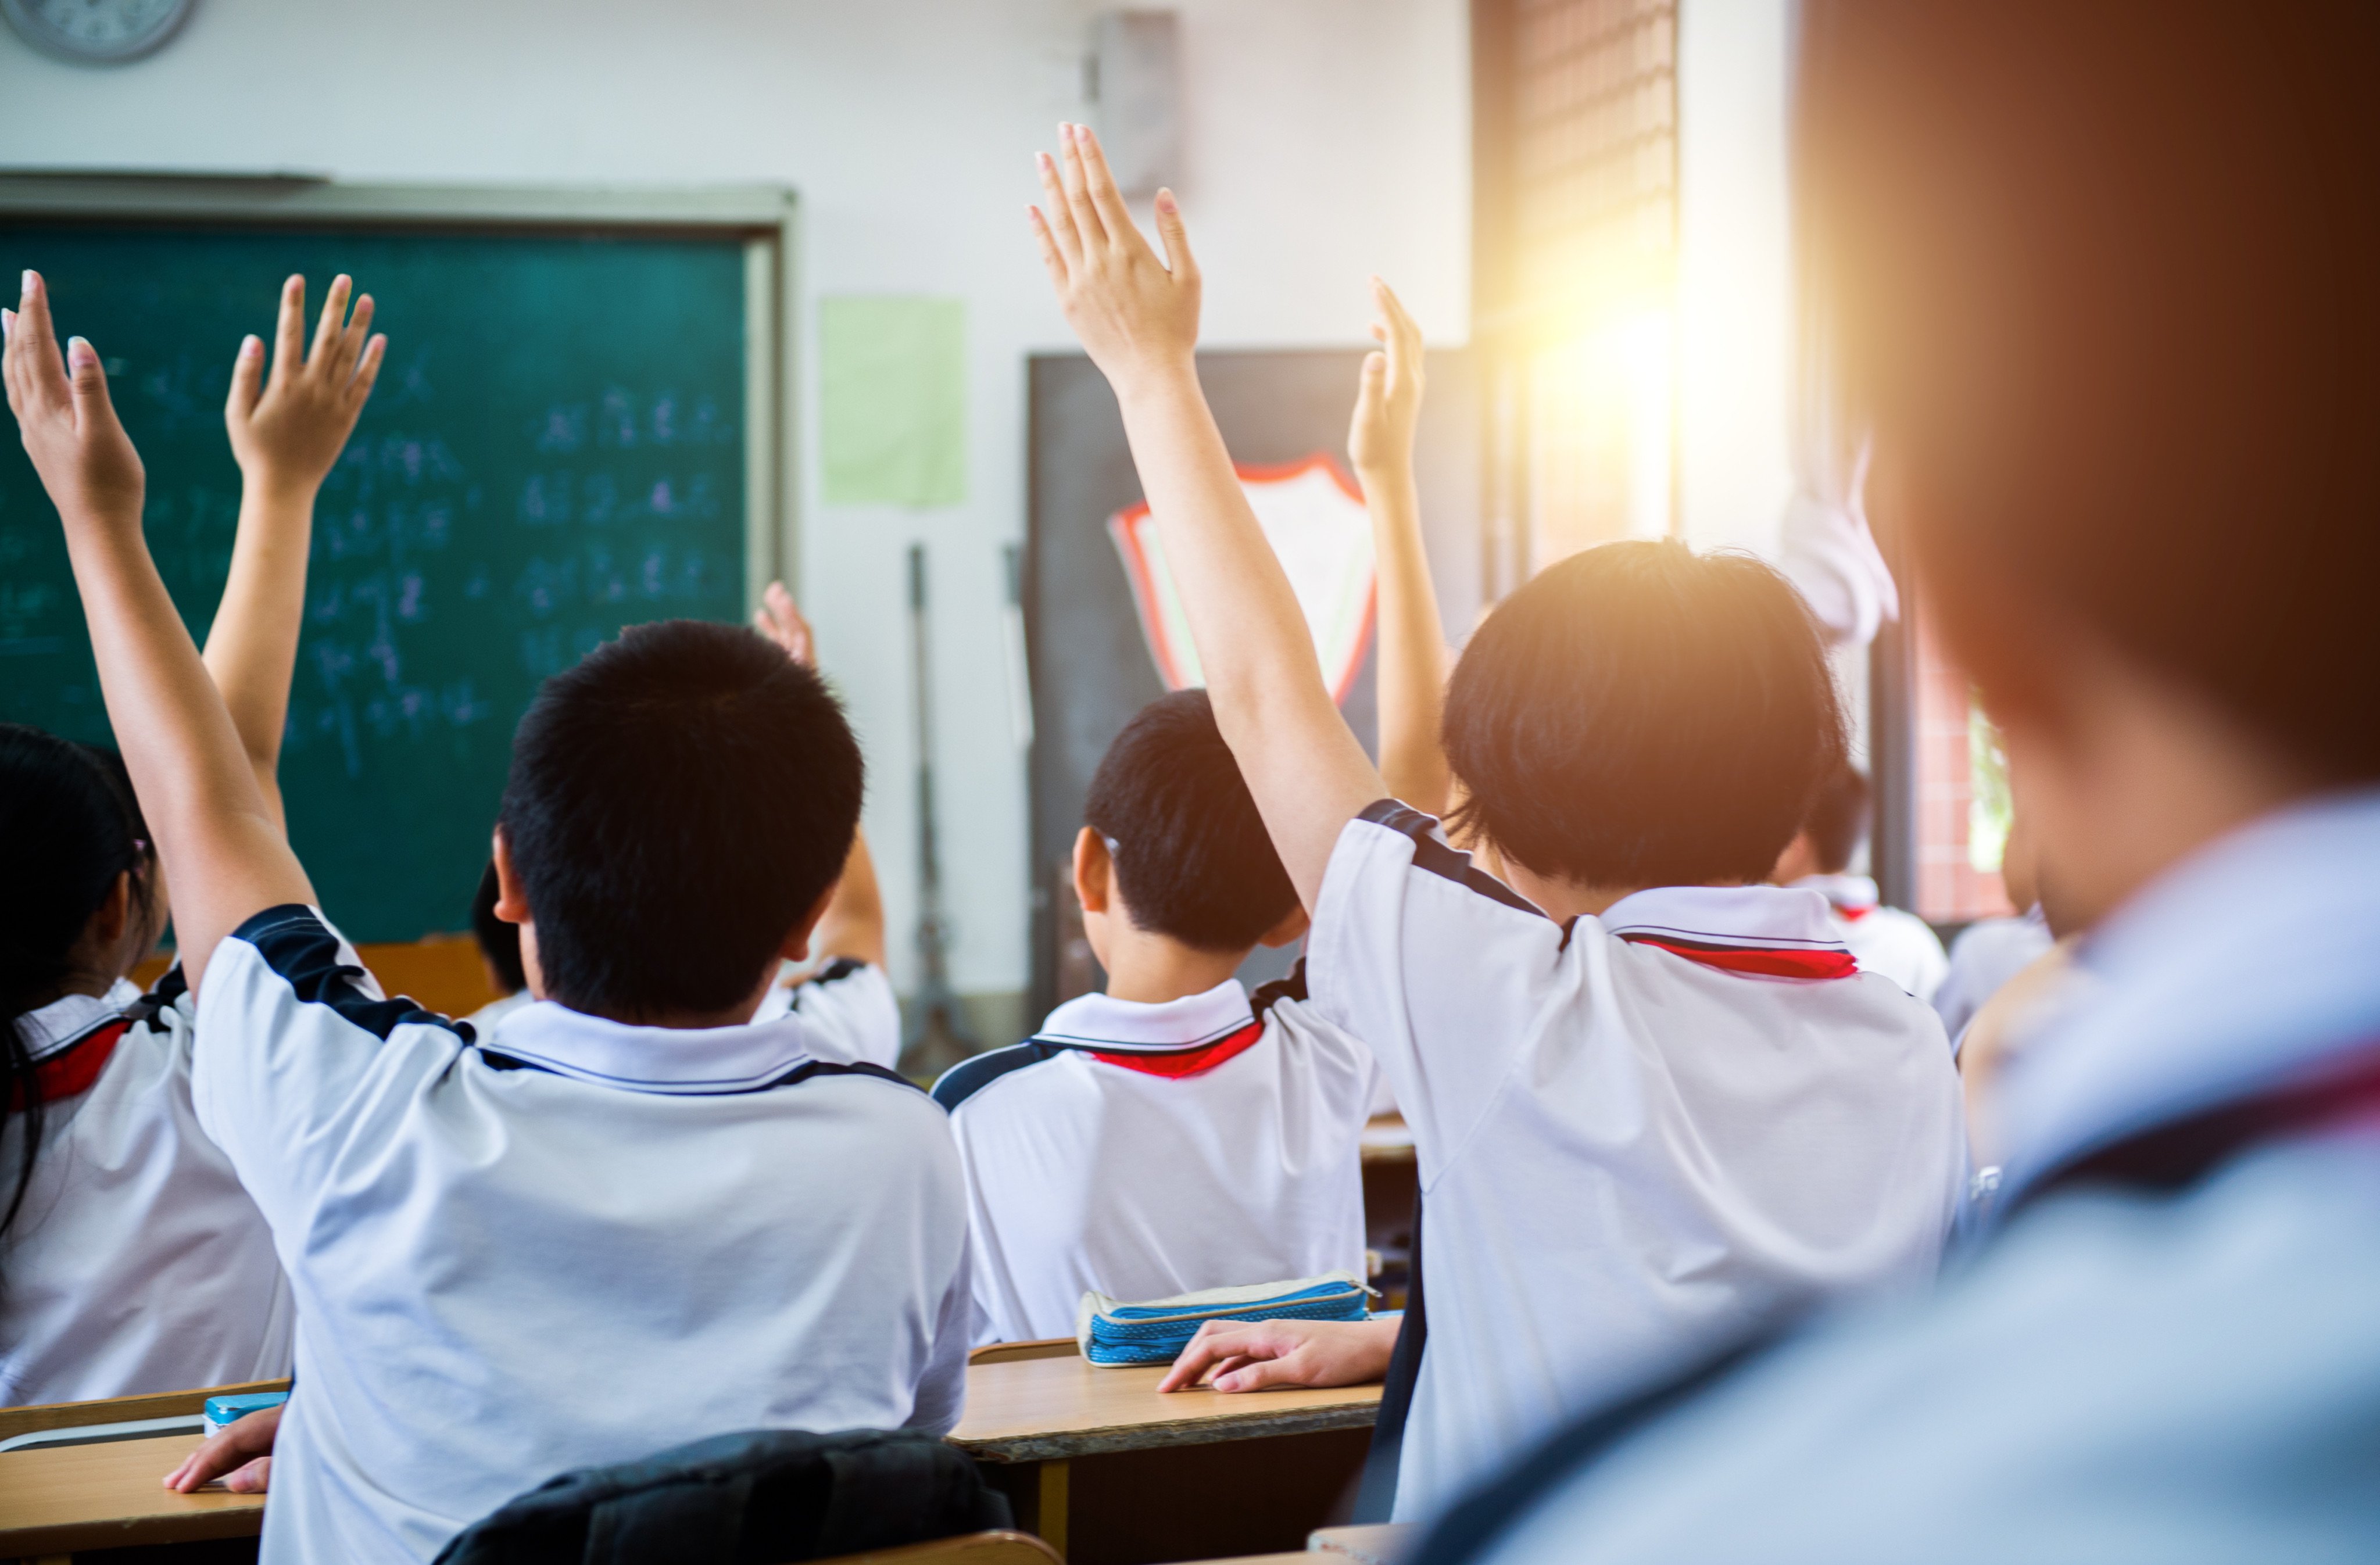 Hong Kong education authorities are looking at ways to reduce the pressure on students’ mental health. Photo: Shutterstock 